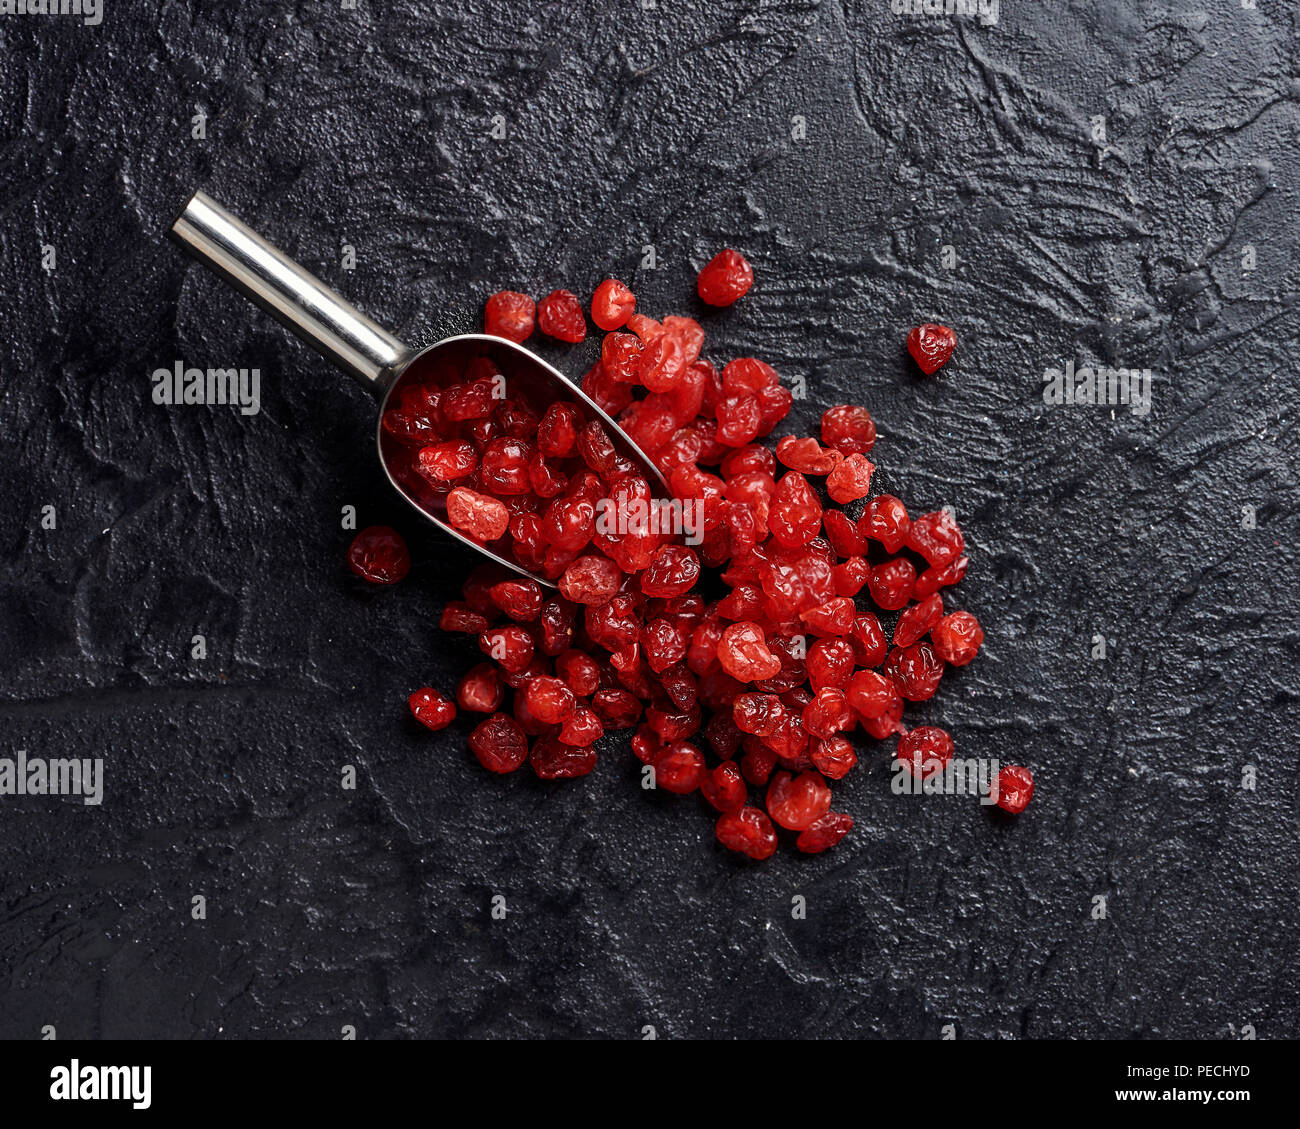 Dried red cherry on black background with scoop Stock Photo